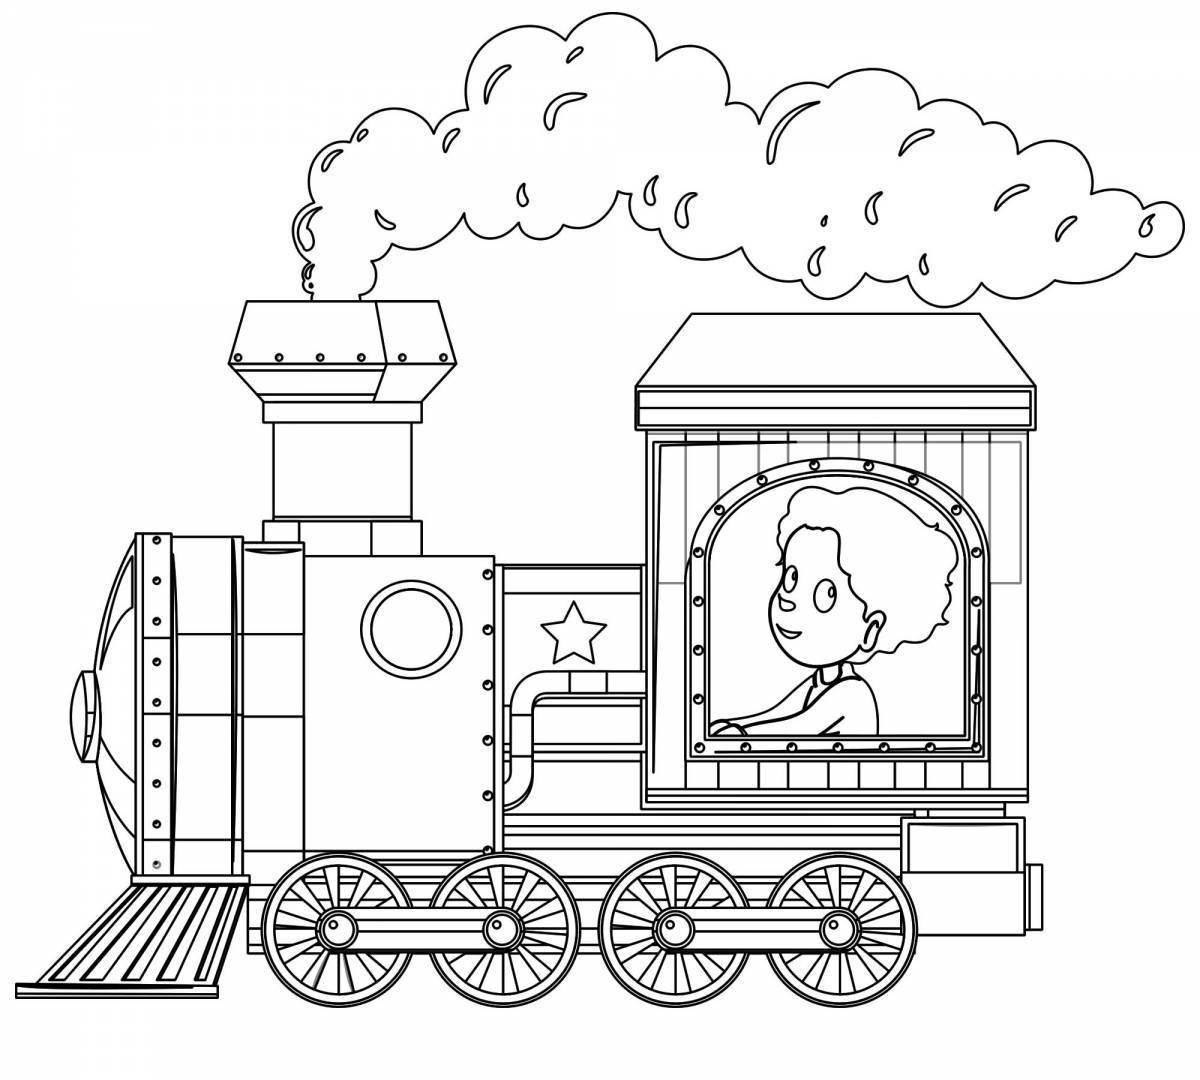 Coloring train for children 4-5 years old